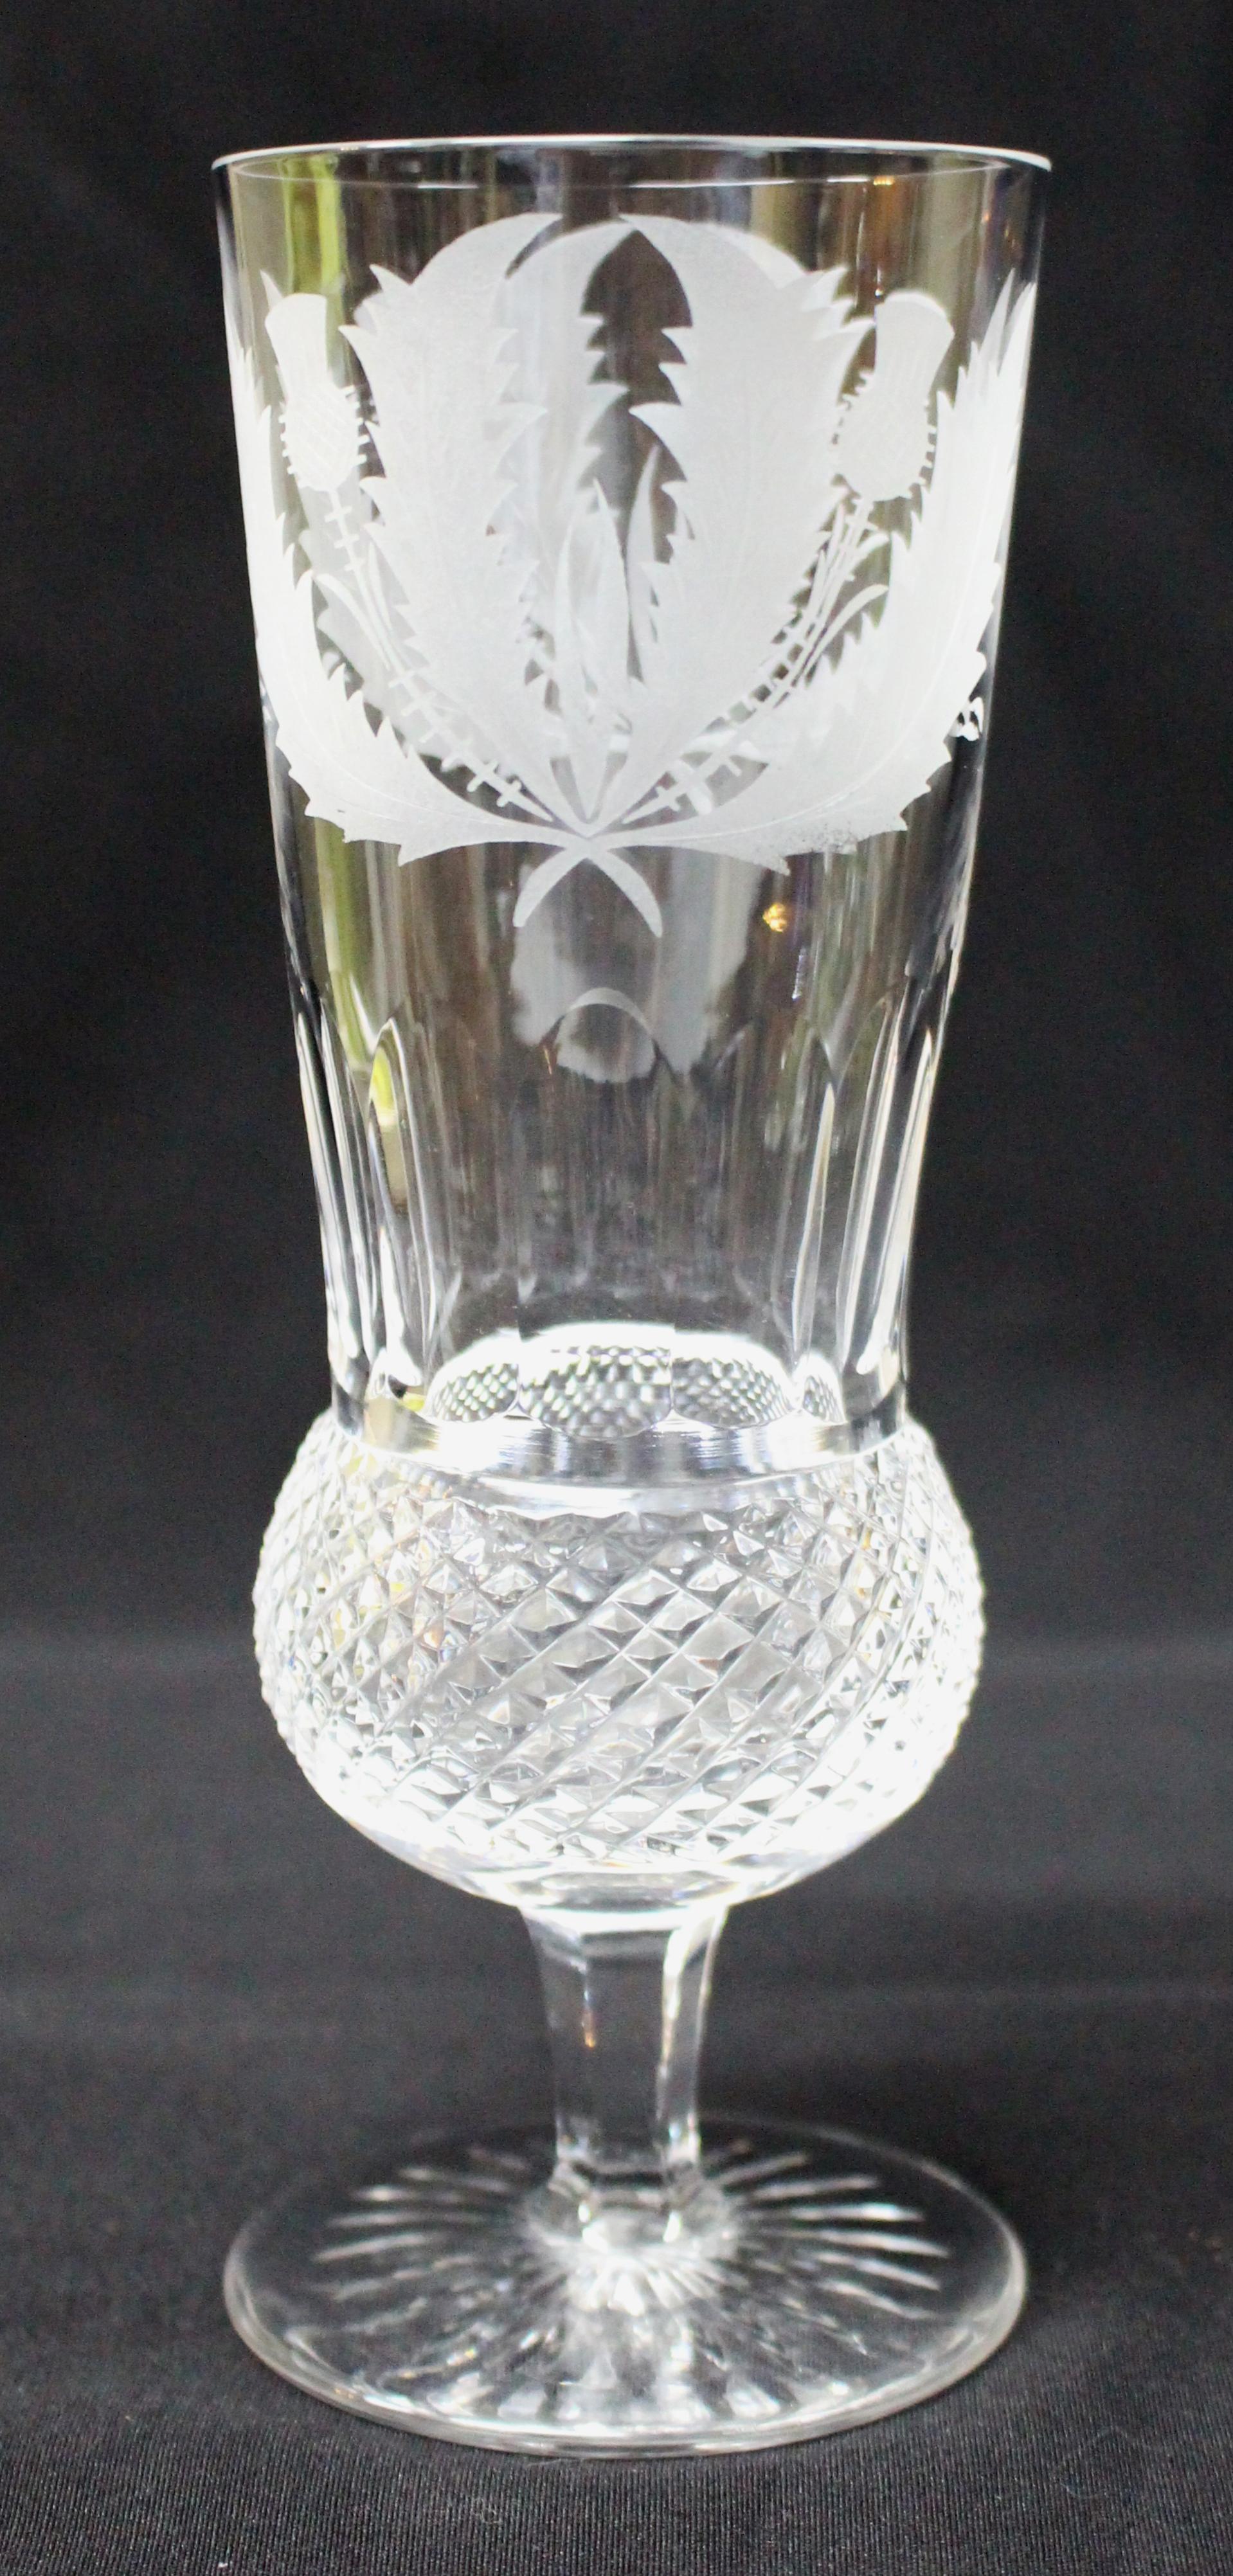 Period: circa 1950
Origin: Edinburgh
Type: Champagne glasses
Set: Six
Top diameter: 7 cm / 2 1/2 in
Height: 18 cm / 7 in

Stunning set of six Edinburgh crystal champagne glasses

Heavily cut lower bowl with acid etched thistle motif to the